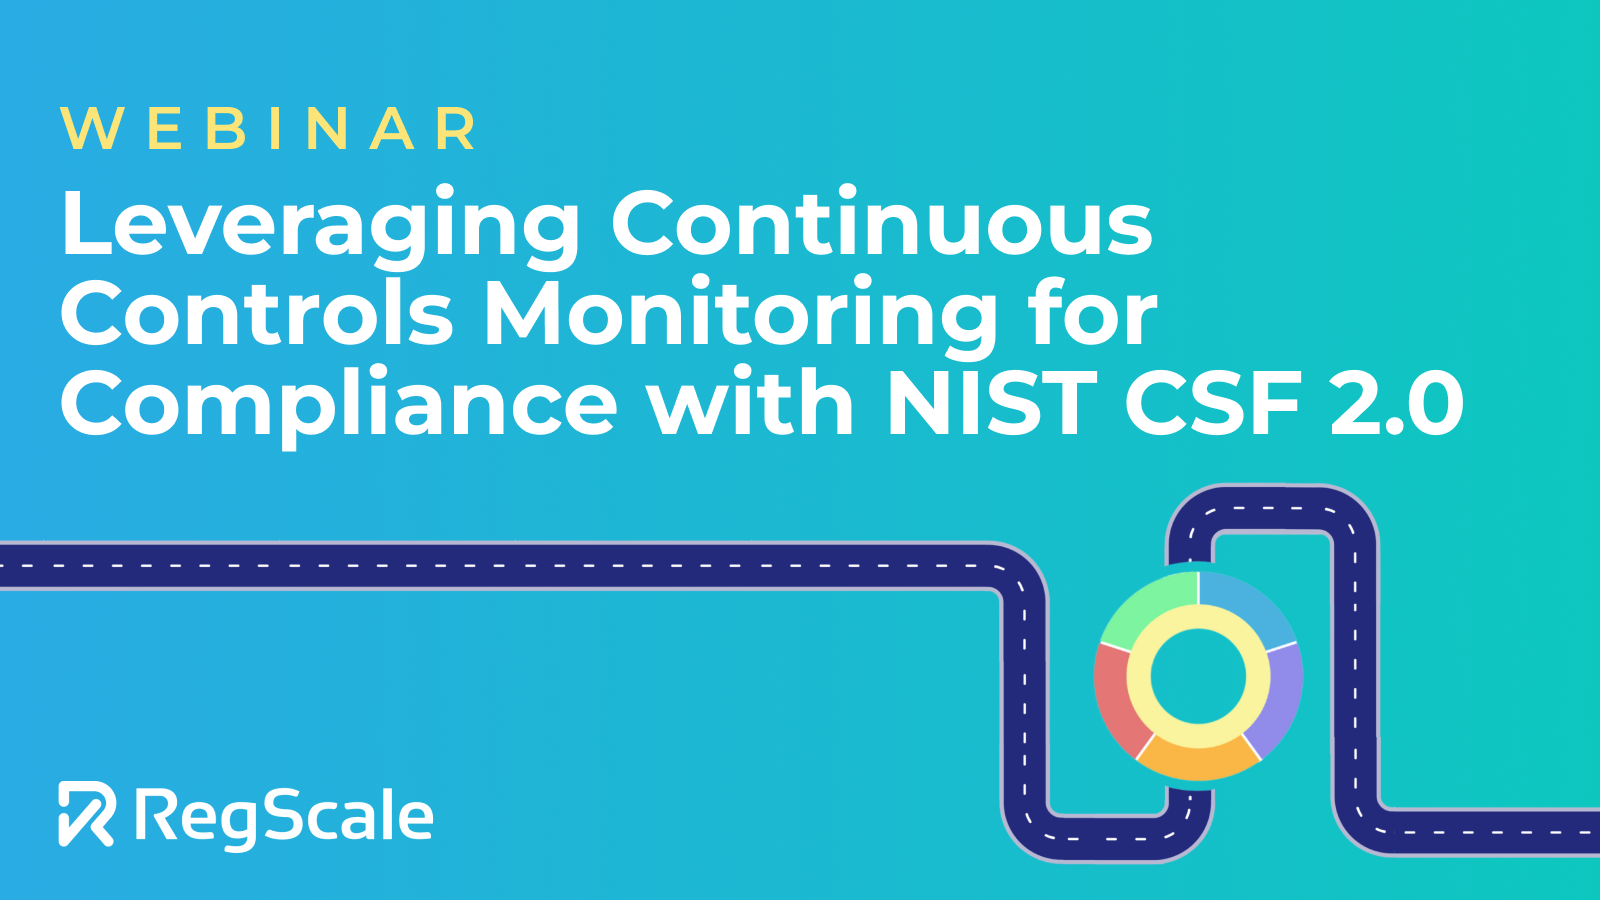 Webinar Leveraging CCM for Compliance with NIST CSF 2.0